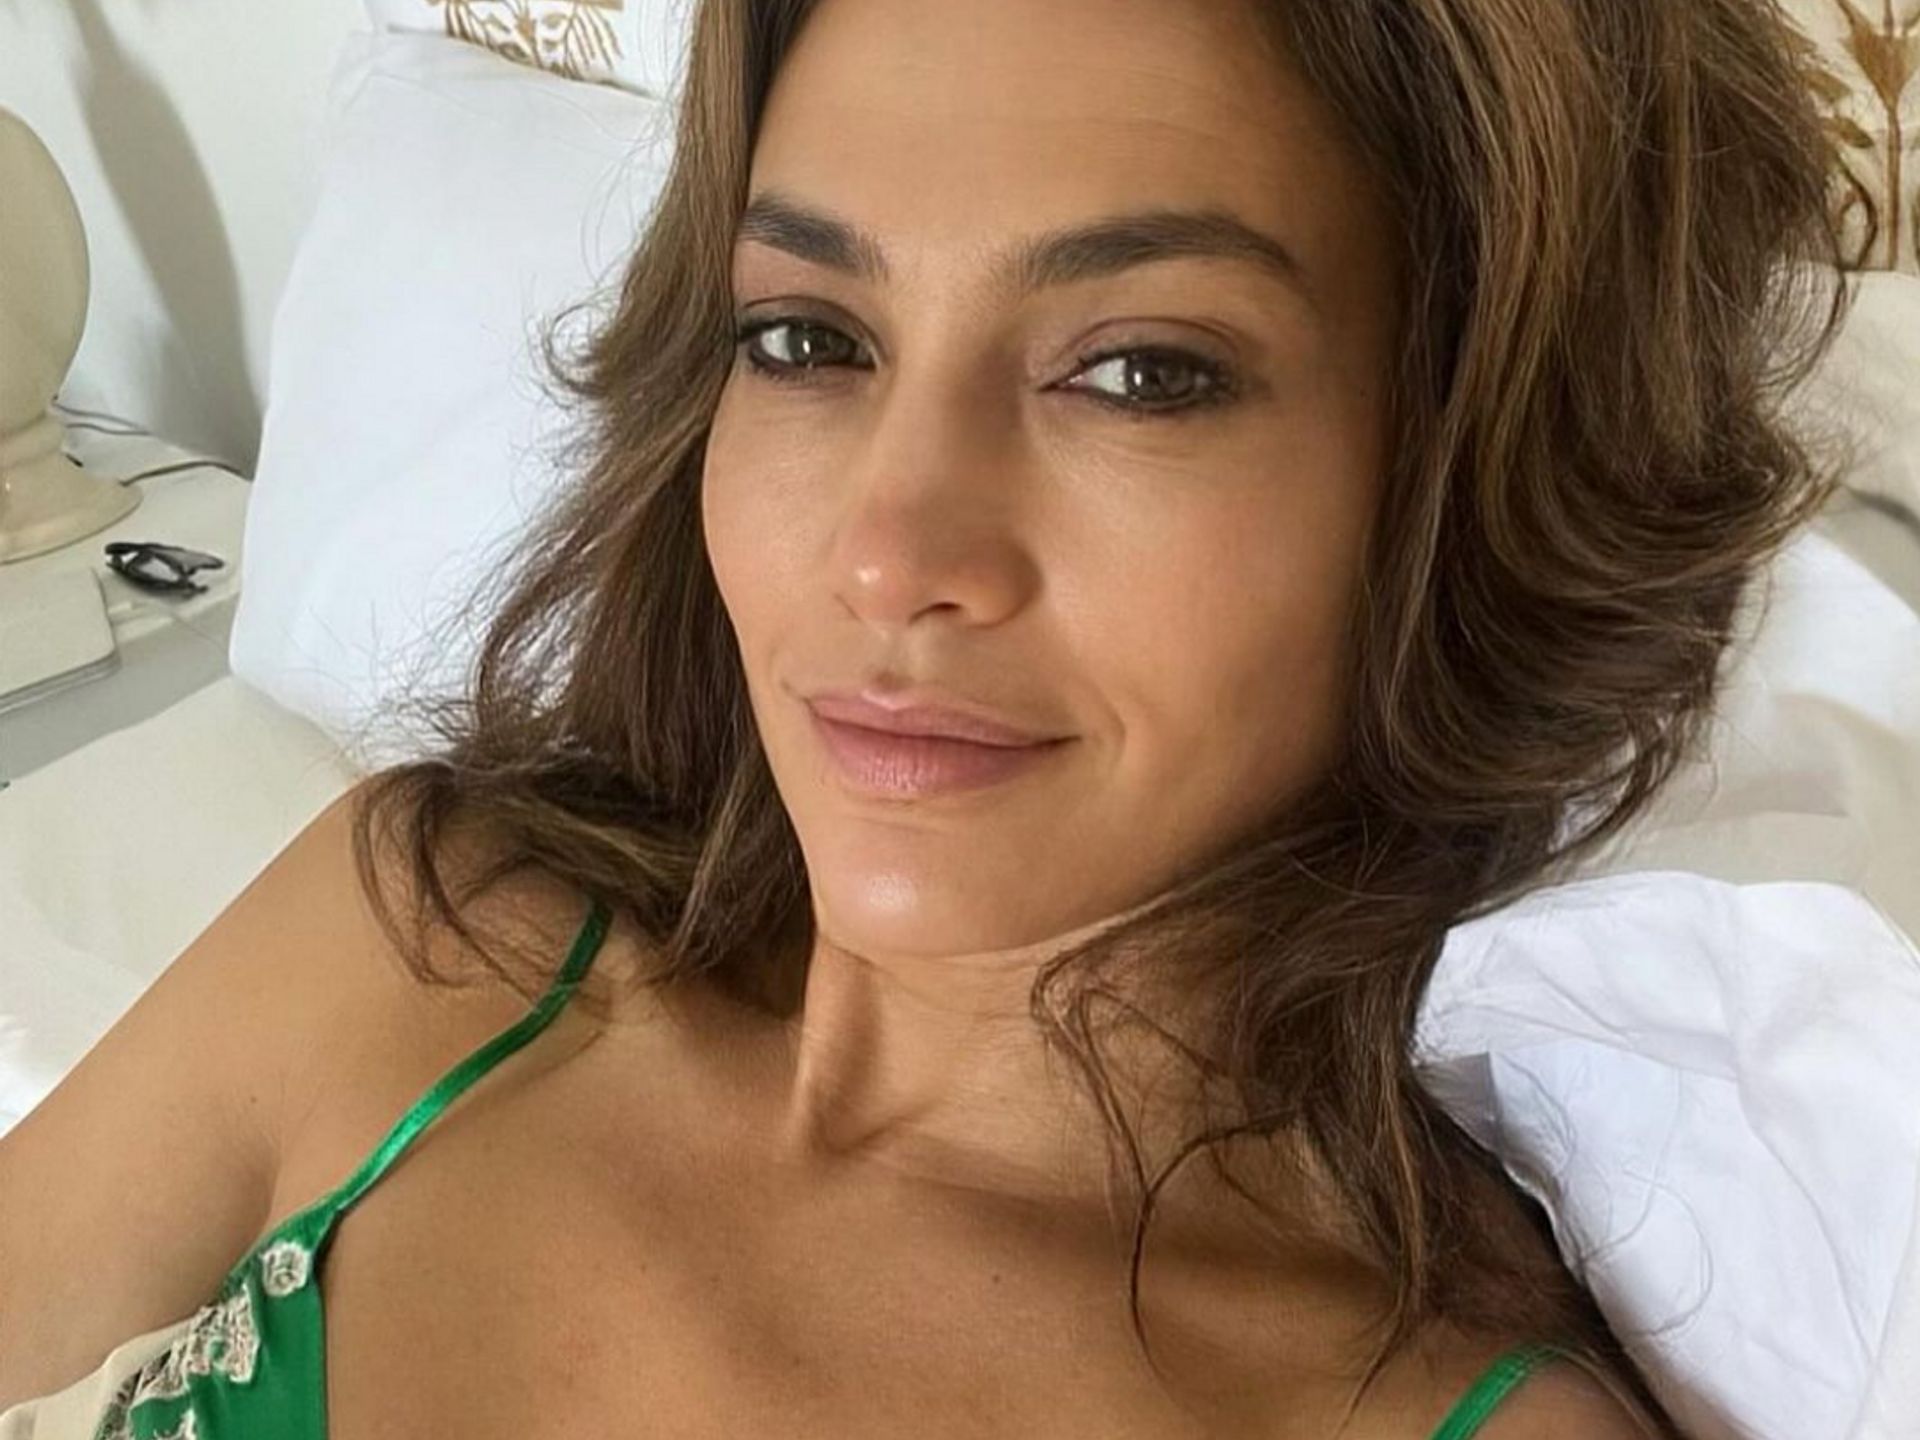 Jennifer Lopez, 54, is ageless as she poses in sheer top